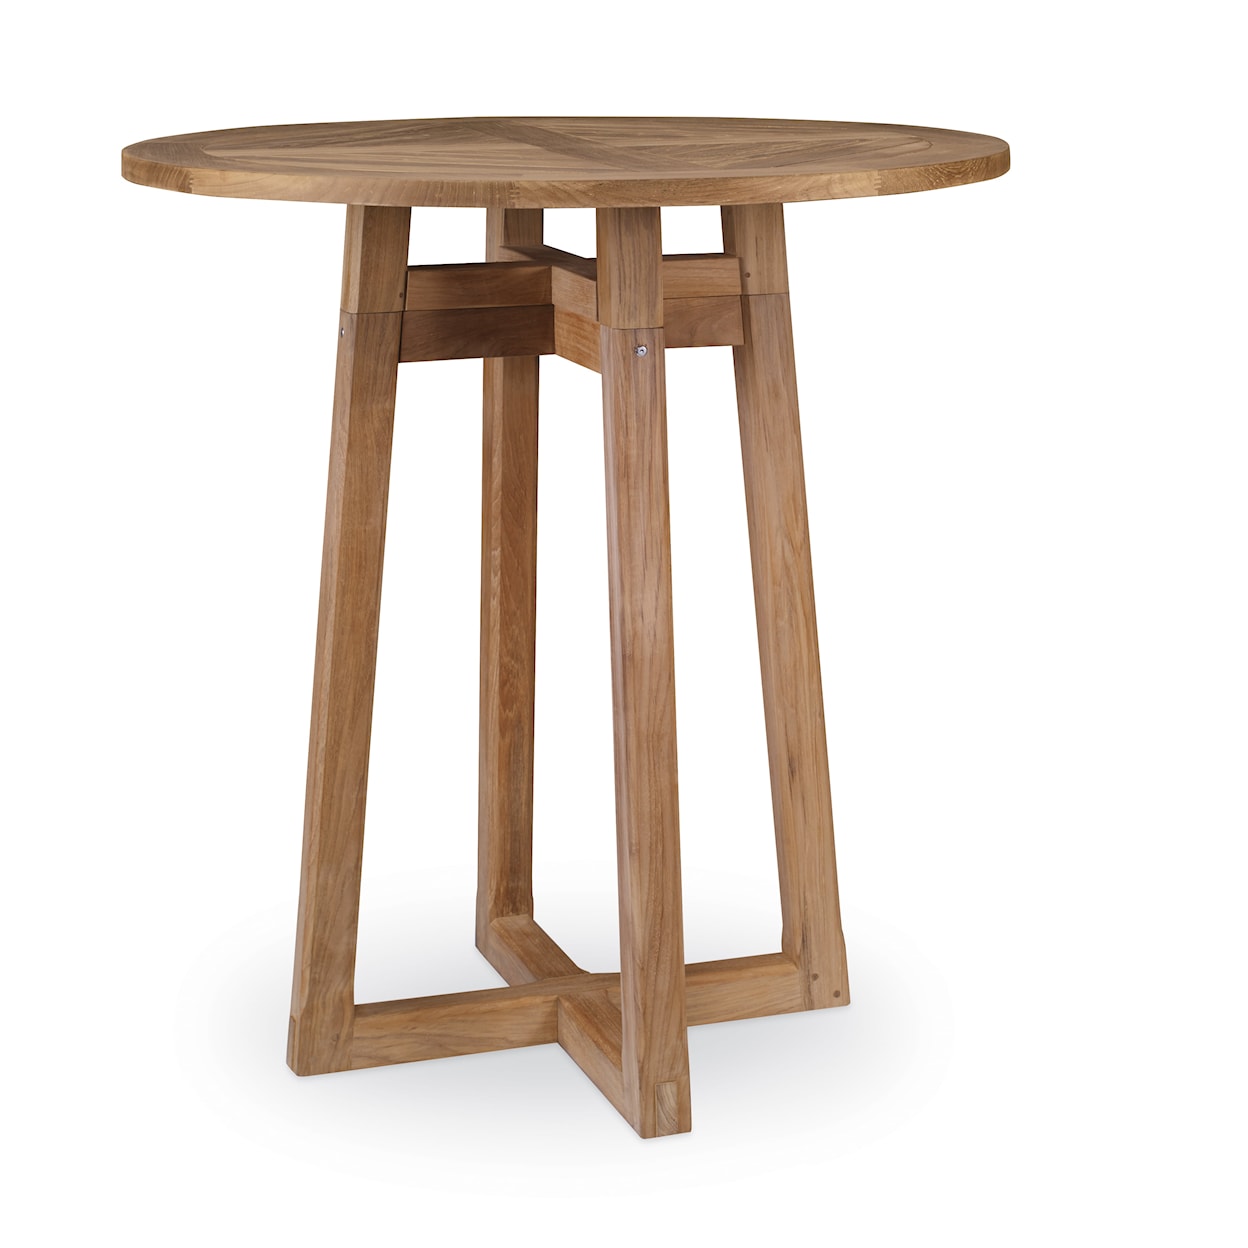 Century West Bay Outdoor Bar / Counter Stools